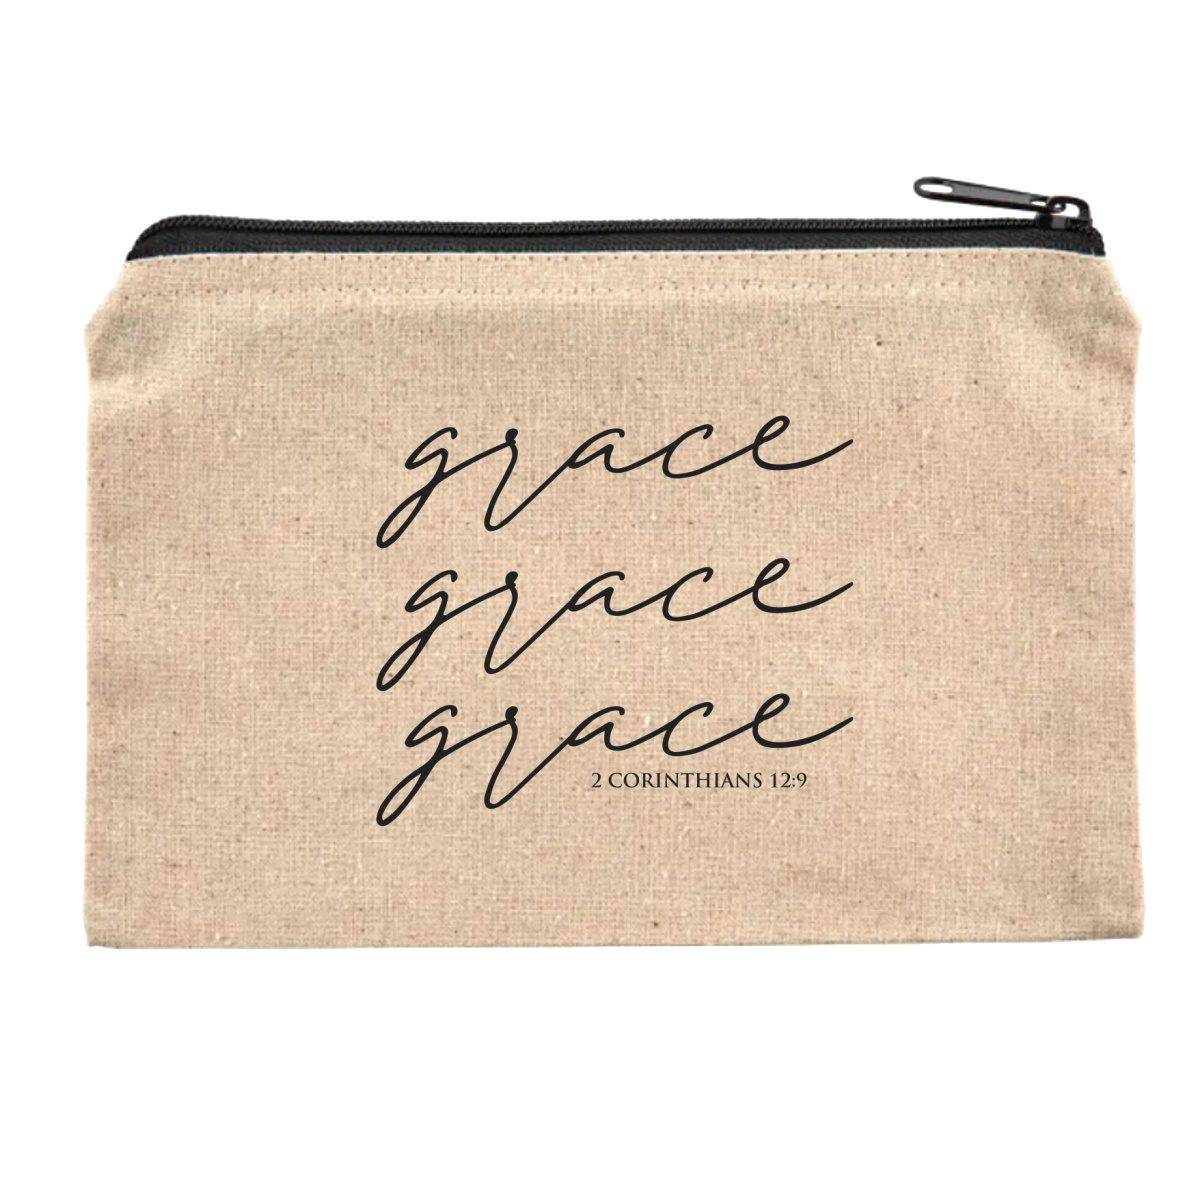 Canvas Travel Pouches Customized